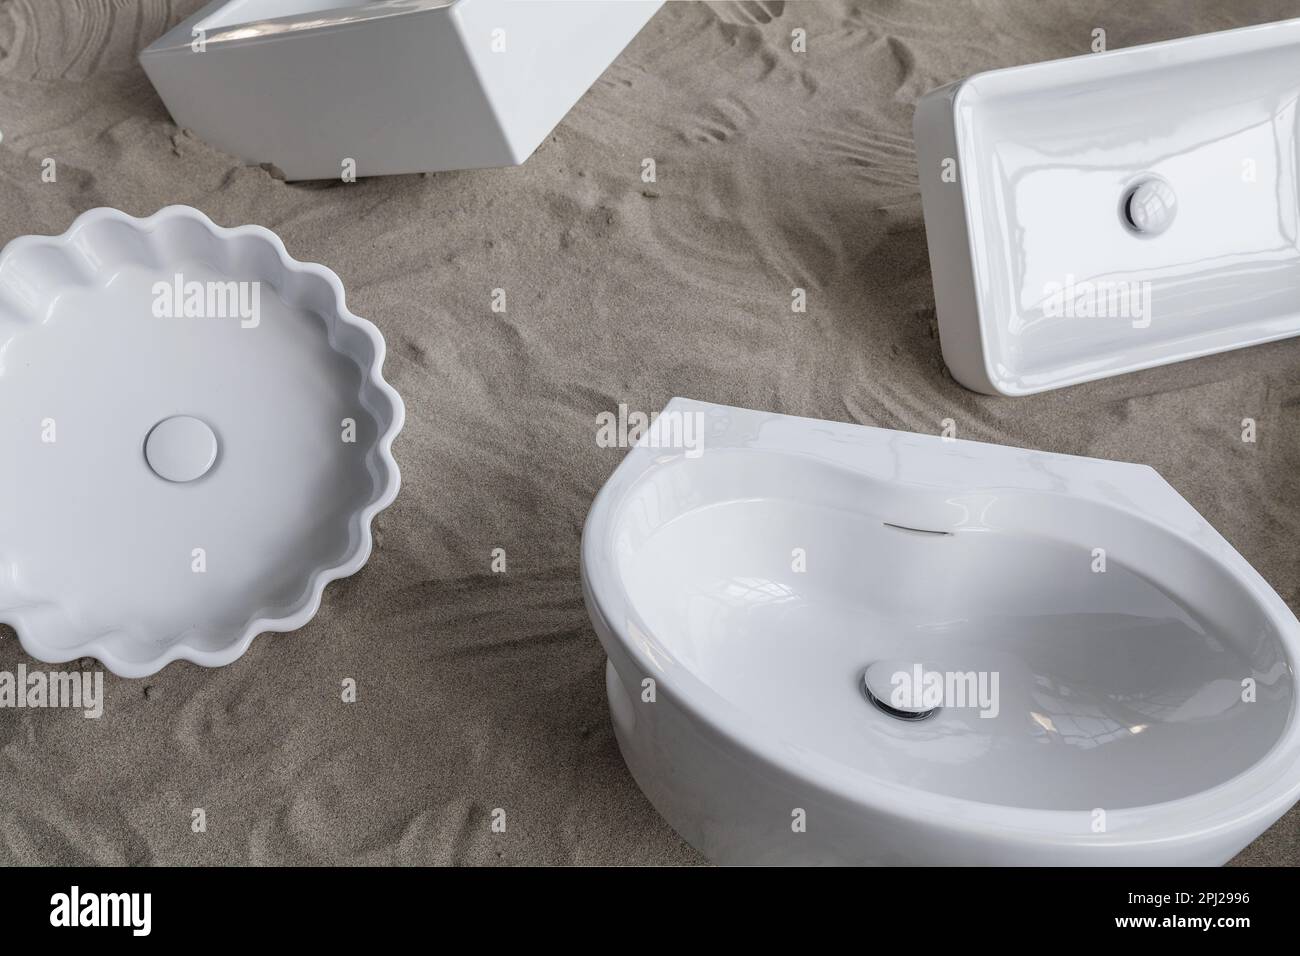 Conceptual exposition of new designer white ceramic bathroom sinks for sale on a sand base. Stock Photo